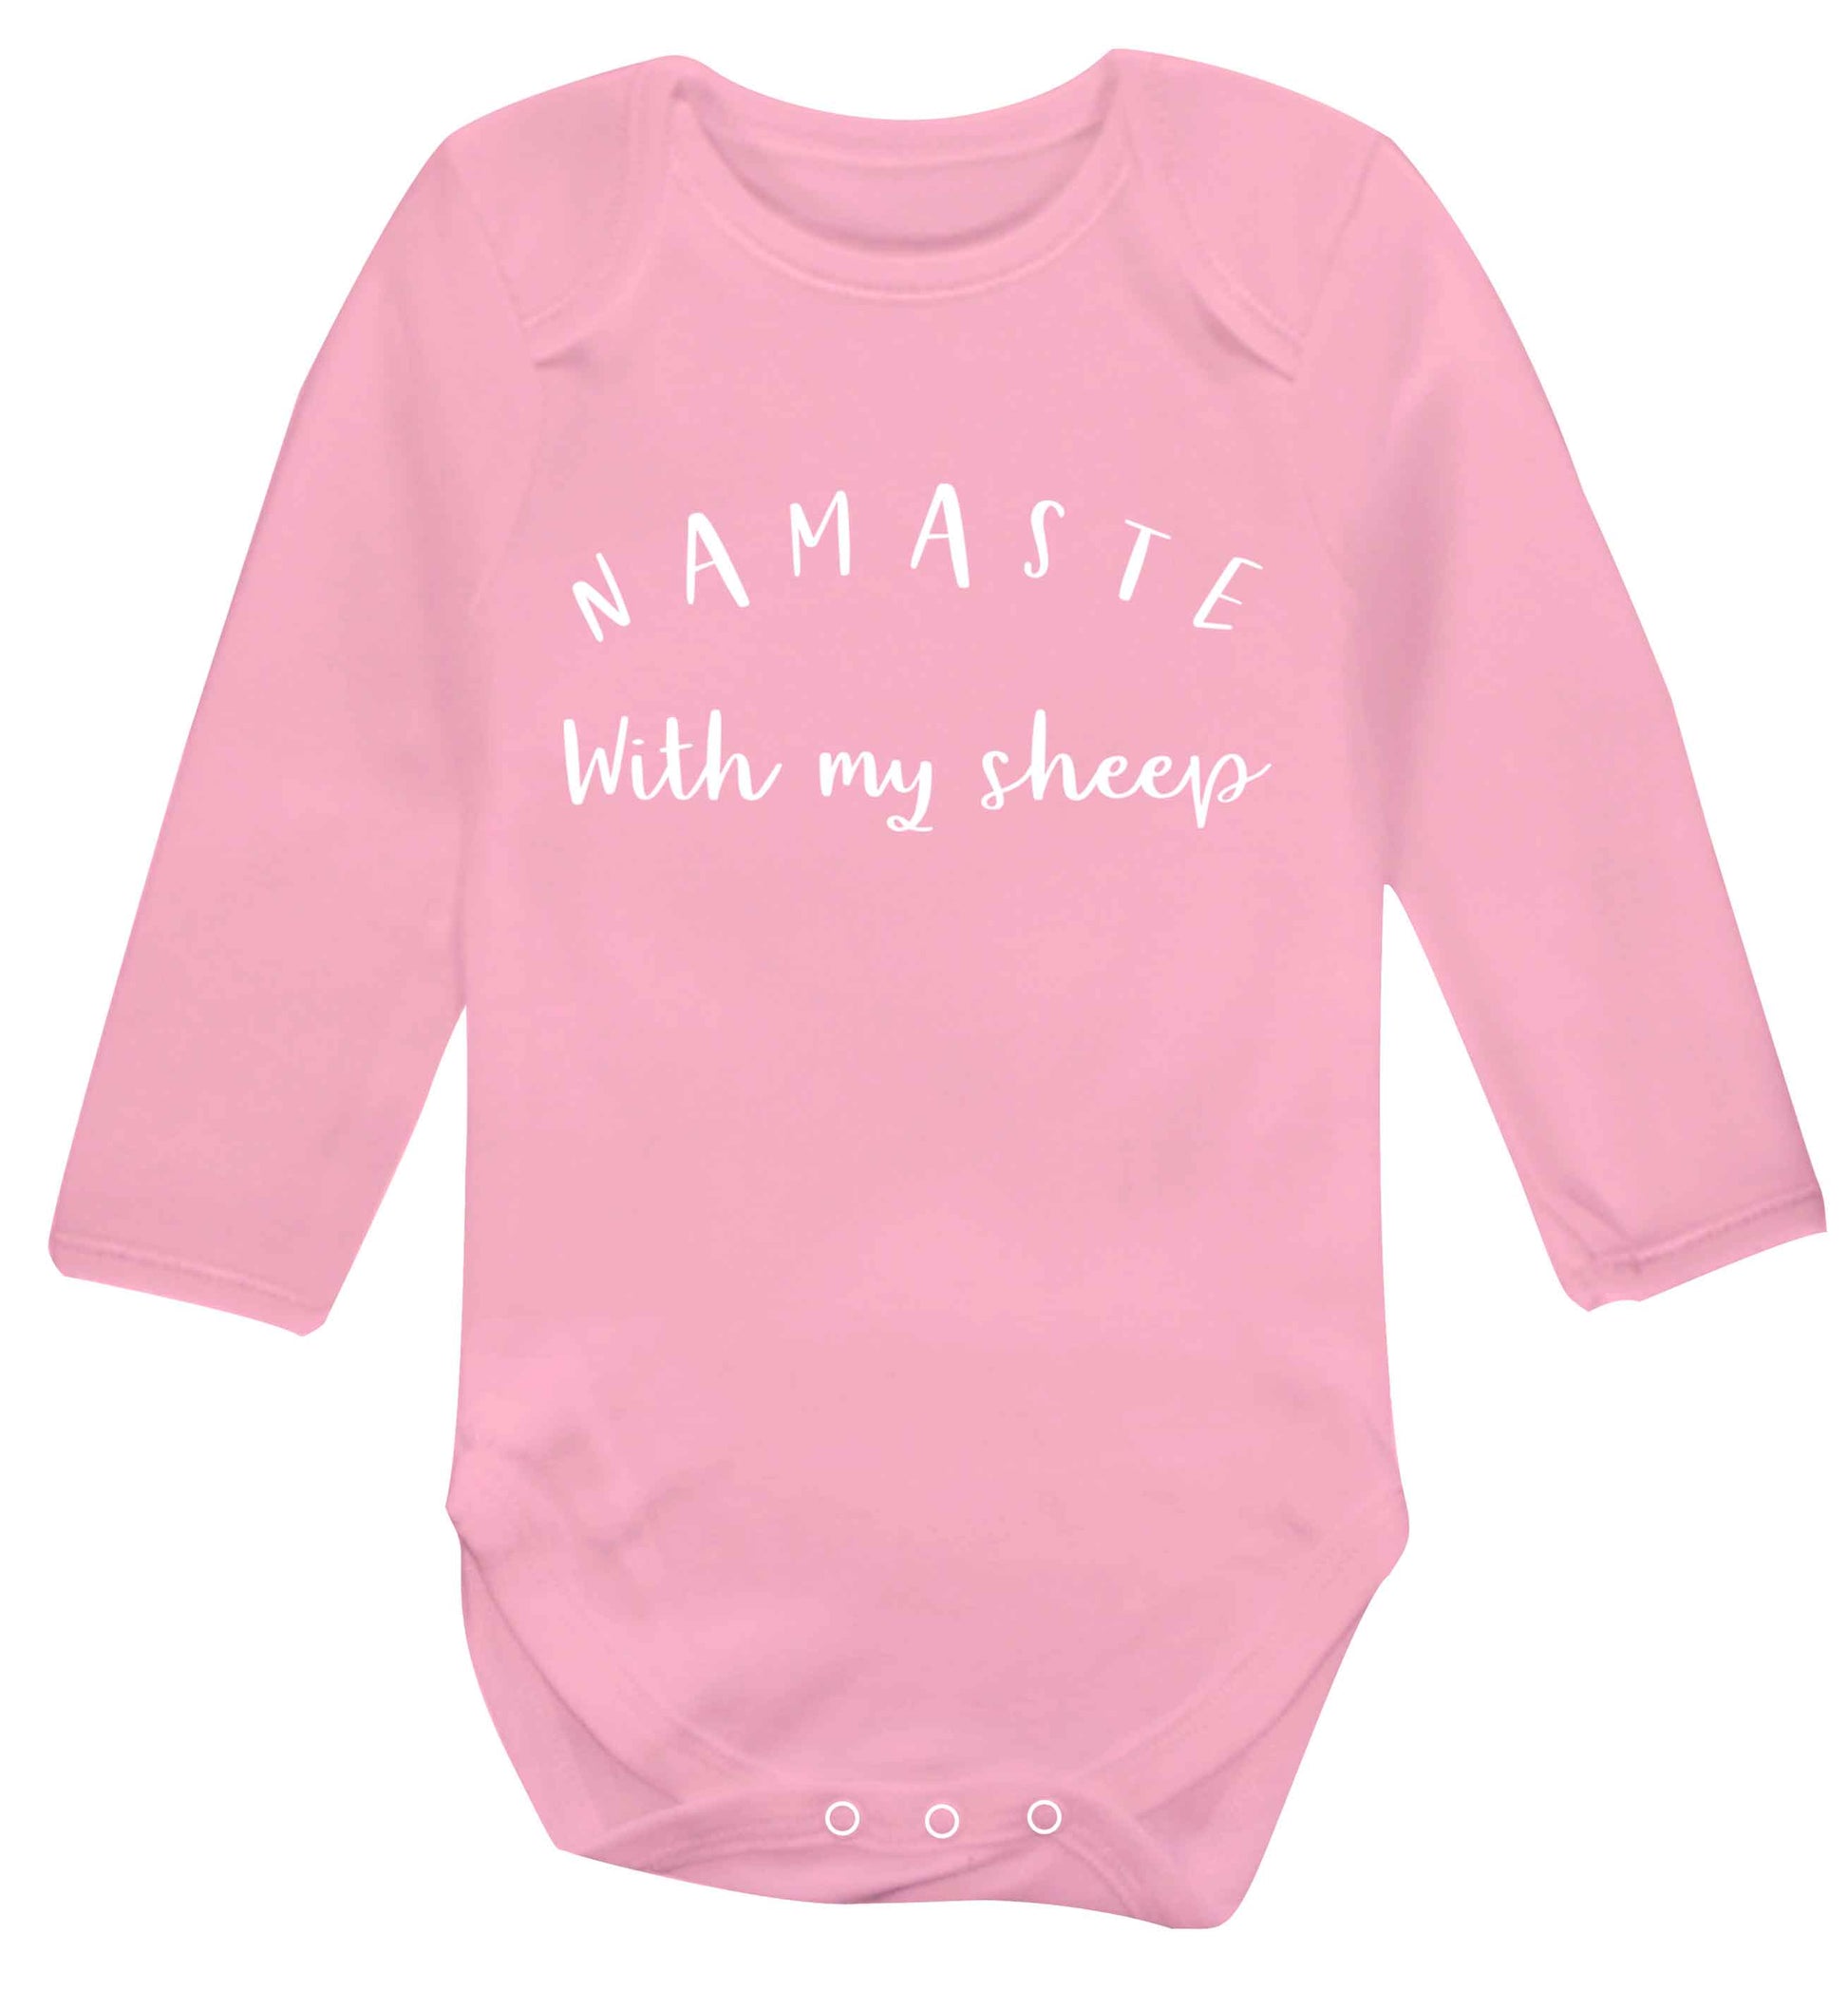 Namaste with my sheep Baby Vest long sleeved pale pink 6-12 months